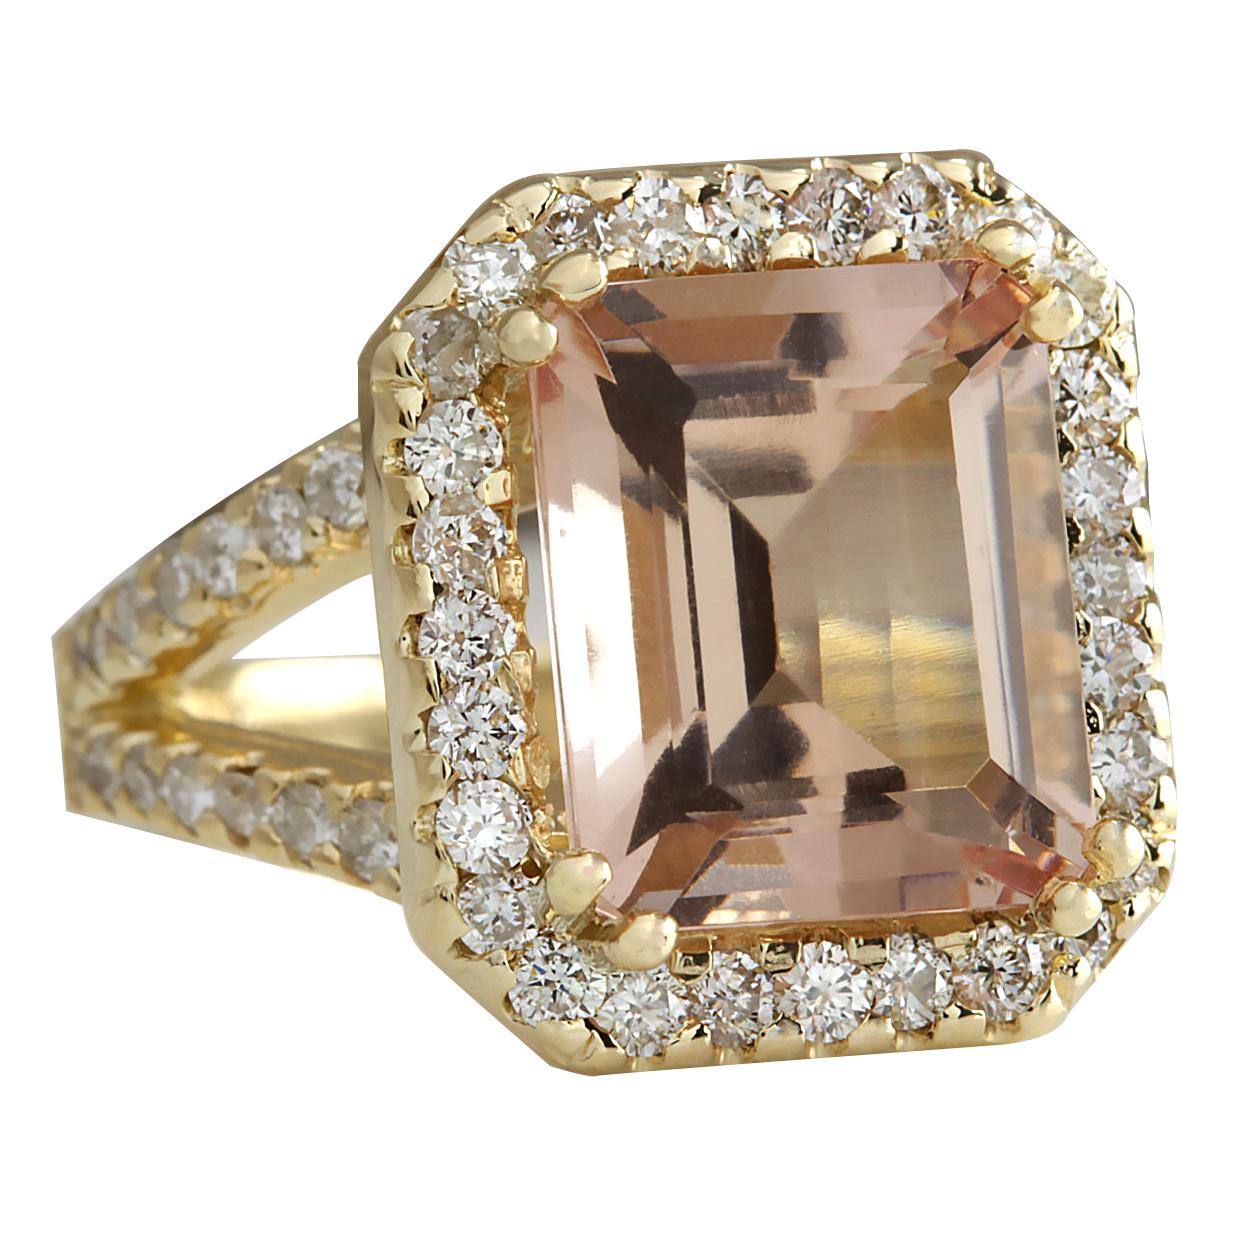 6.92 Carat Natural Morganite 14 Karat Yellow Gold Diamond Ring
Stamped: 14K Yellow Gold
Total Ring Weight: 9.0 Grams
Total Natural Morganite Weight is 5.57 Carat (Measures: 12.00x10.00 mm)
Color: Peach
Total Natural Diamond Weight is 1.35